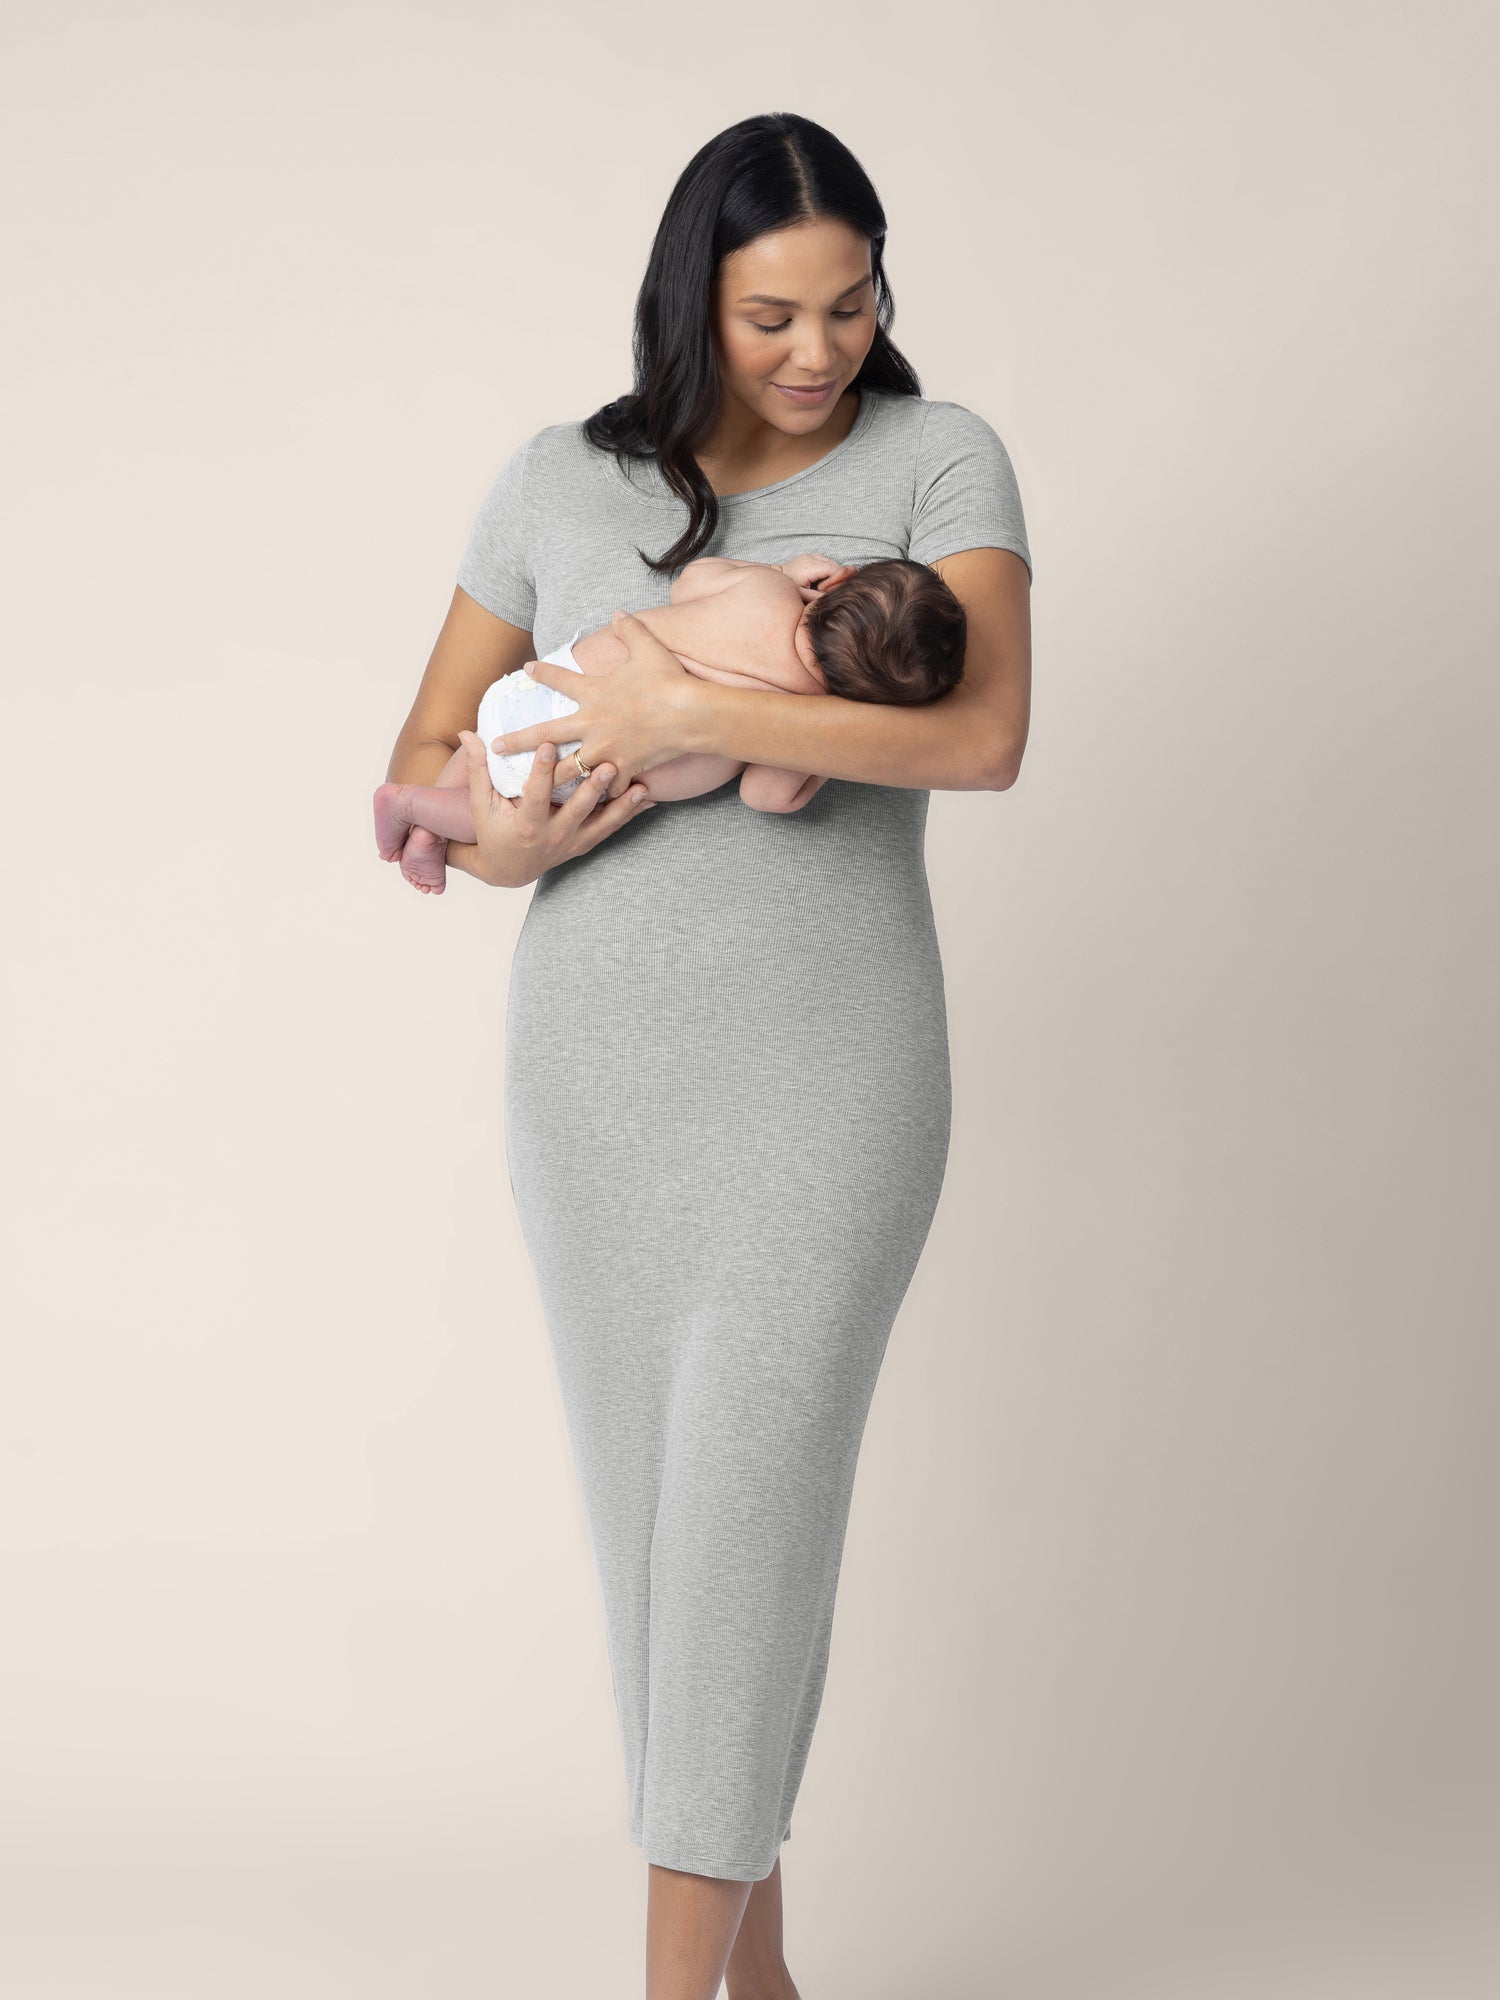 Summery Postpartum Style Essentials You'll Love For Years - The Mom Edit